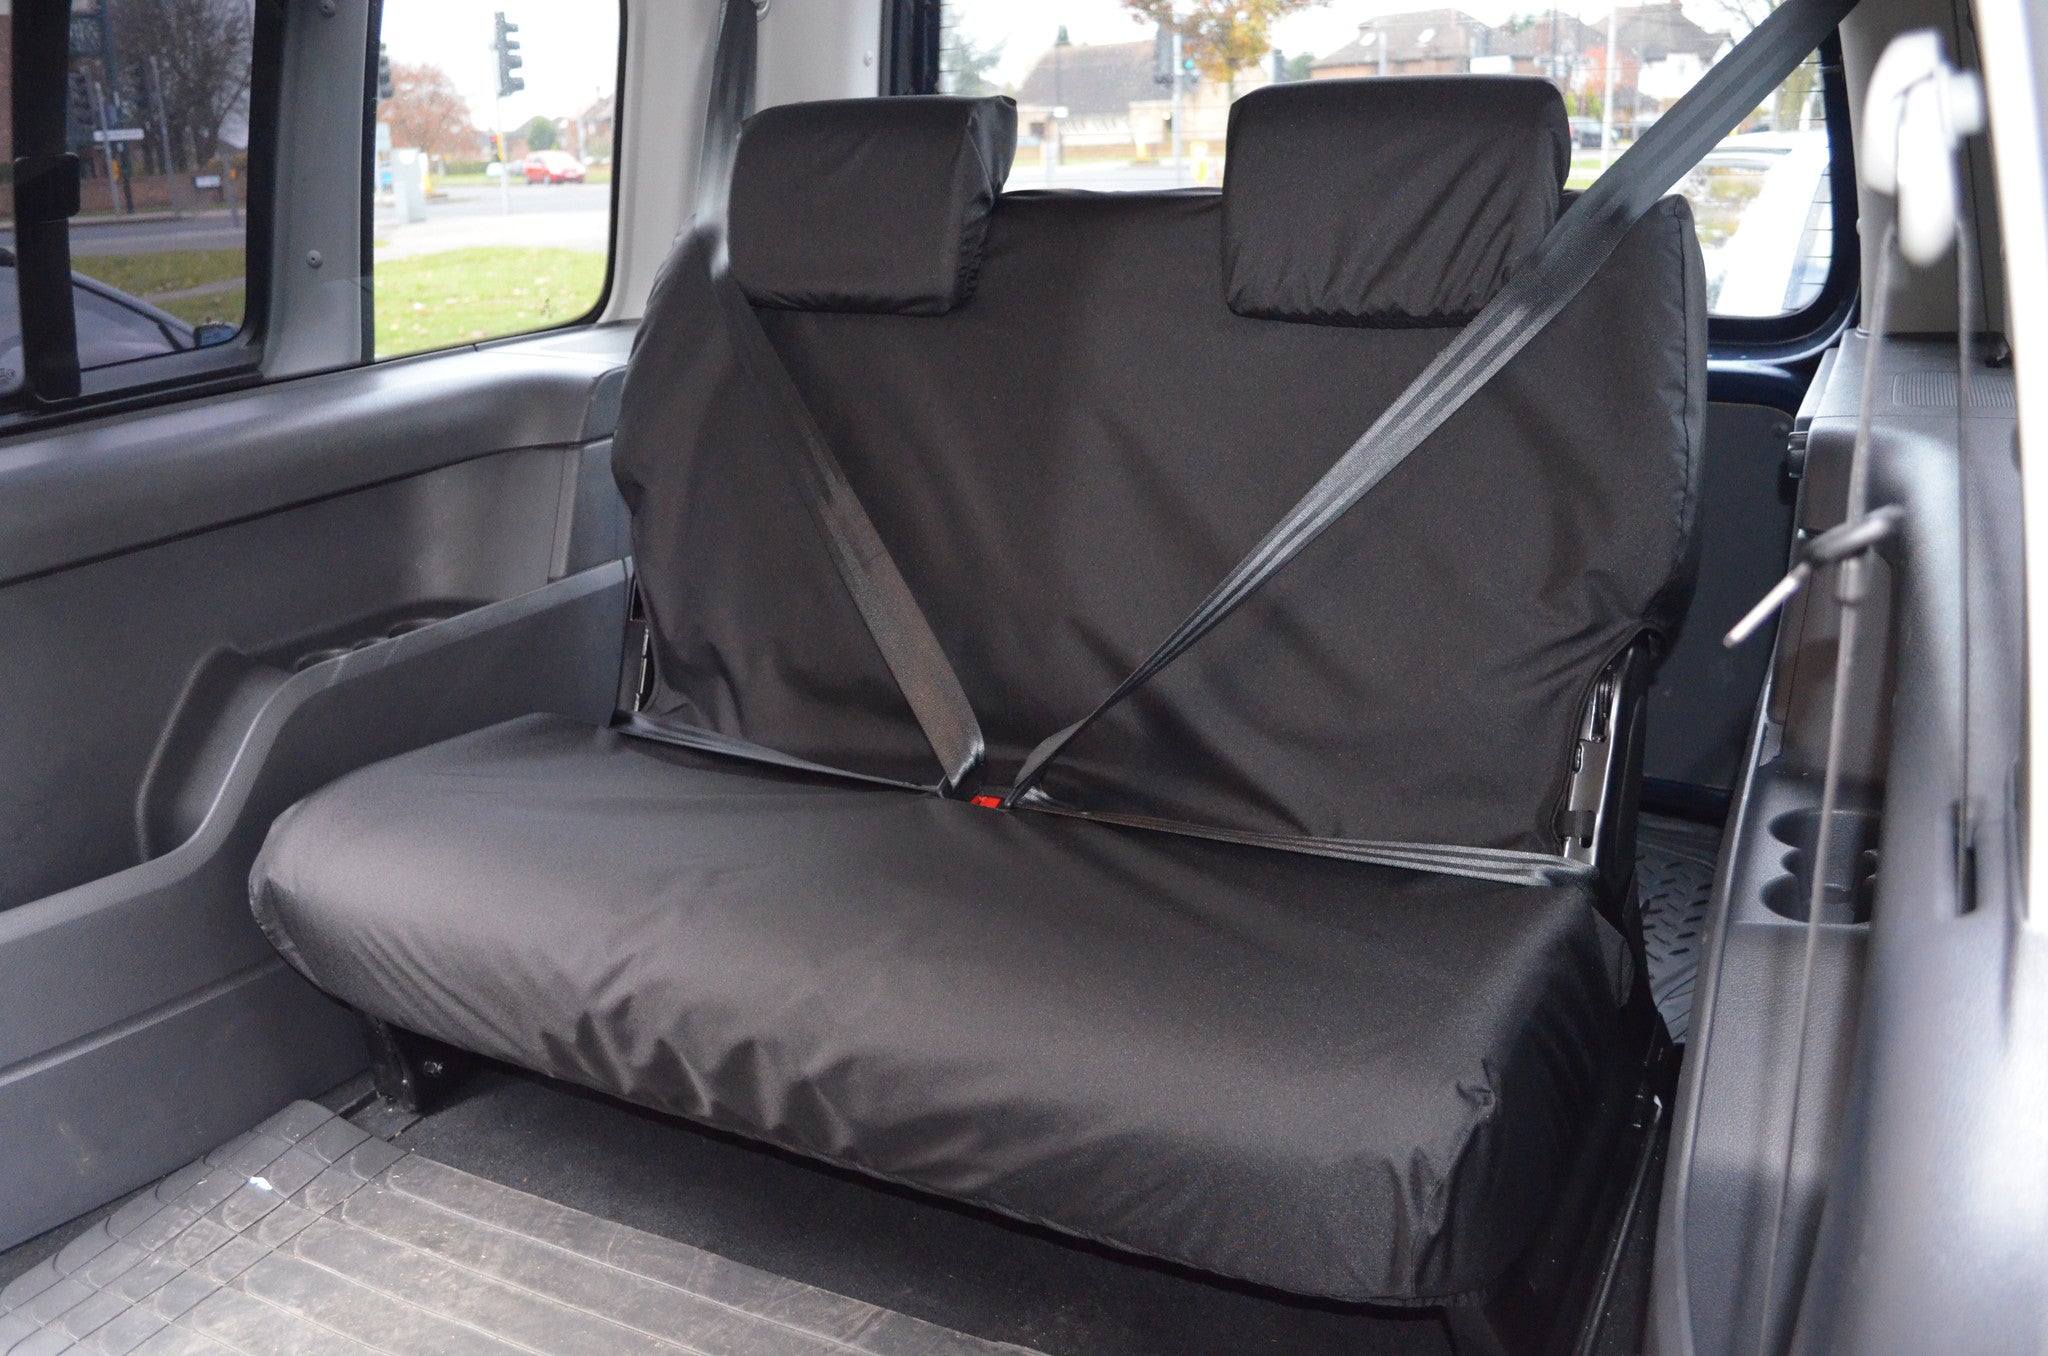 Volkswagen Caddy 2004 Onwards Seat Covers 3rd Row Double Seat / Black Turtle Covers Ltd